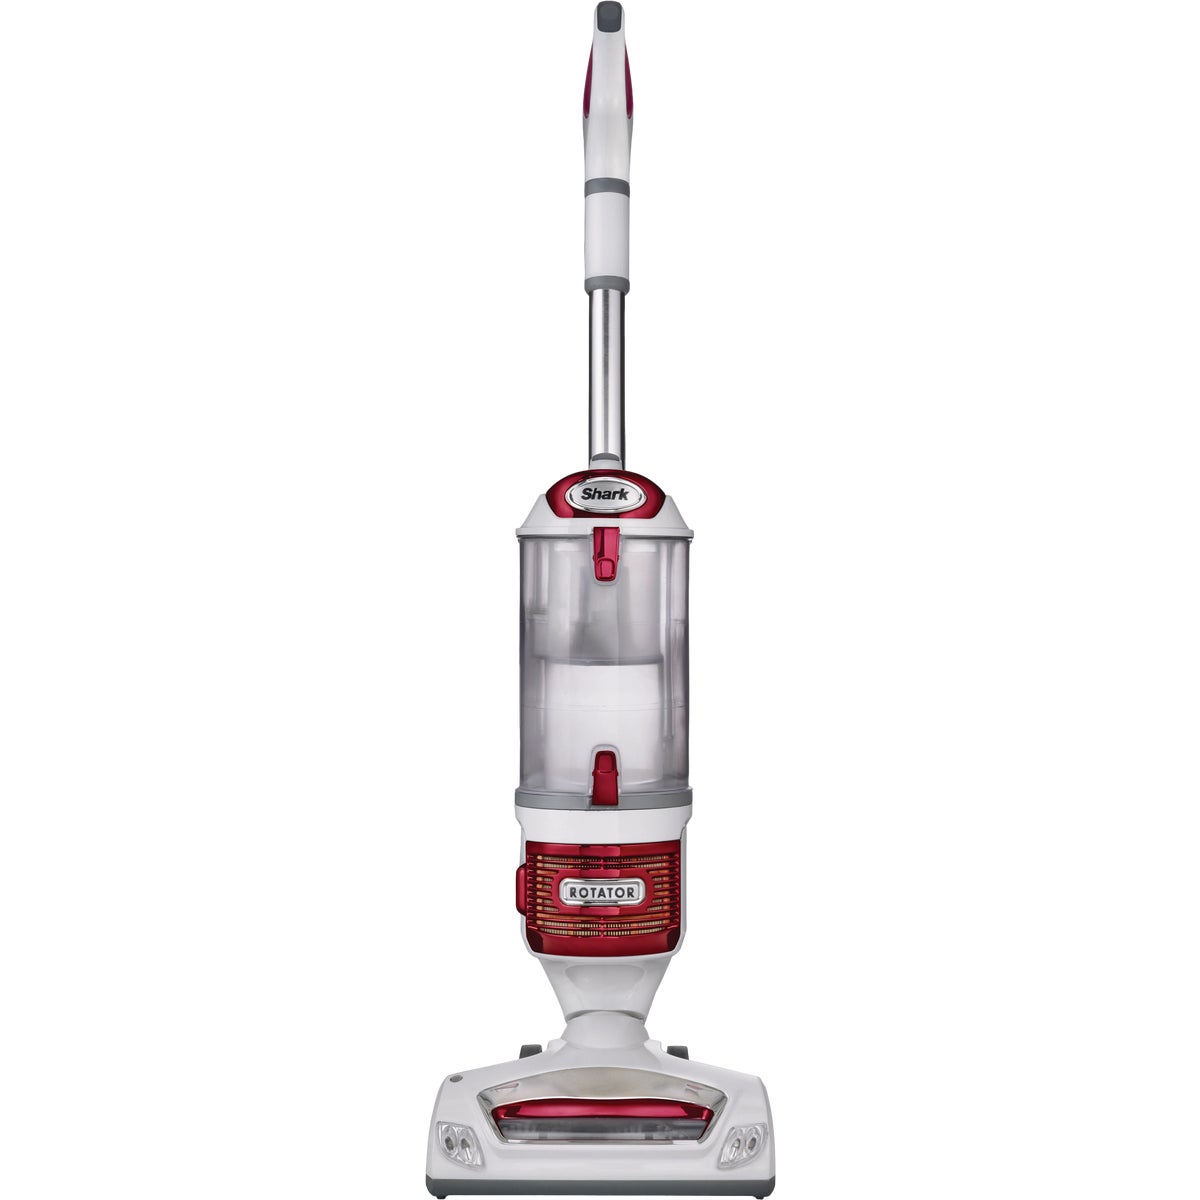 Shark Rotator Professional 3-In-1 Corded Bagless Upright Vacuum Cleaner